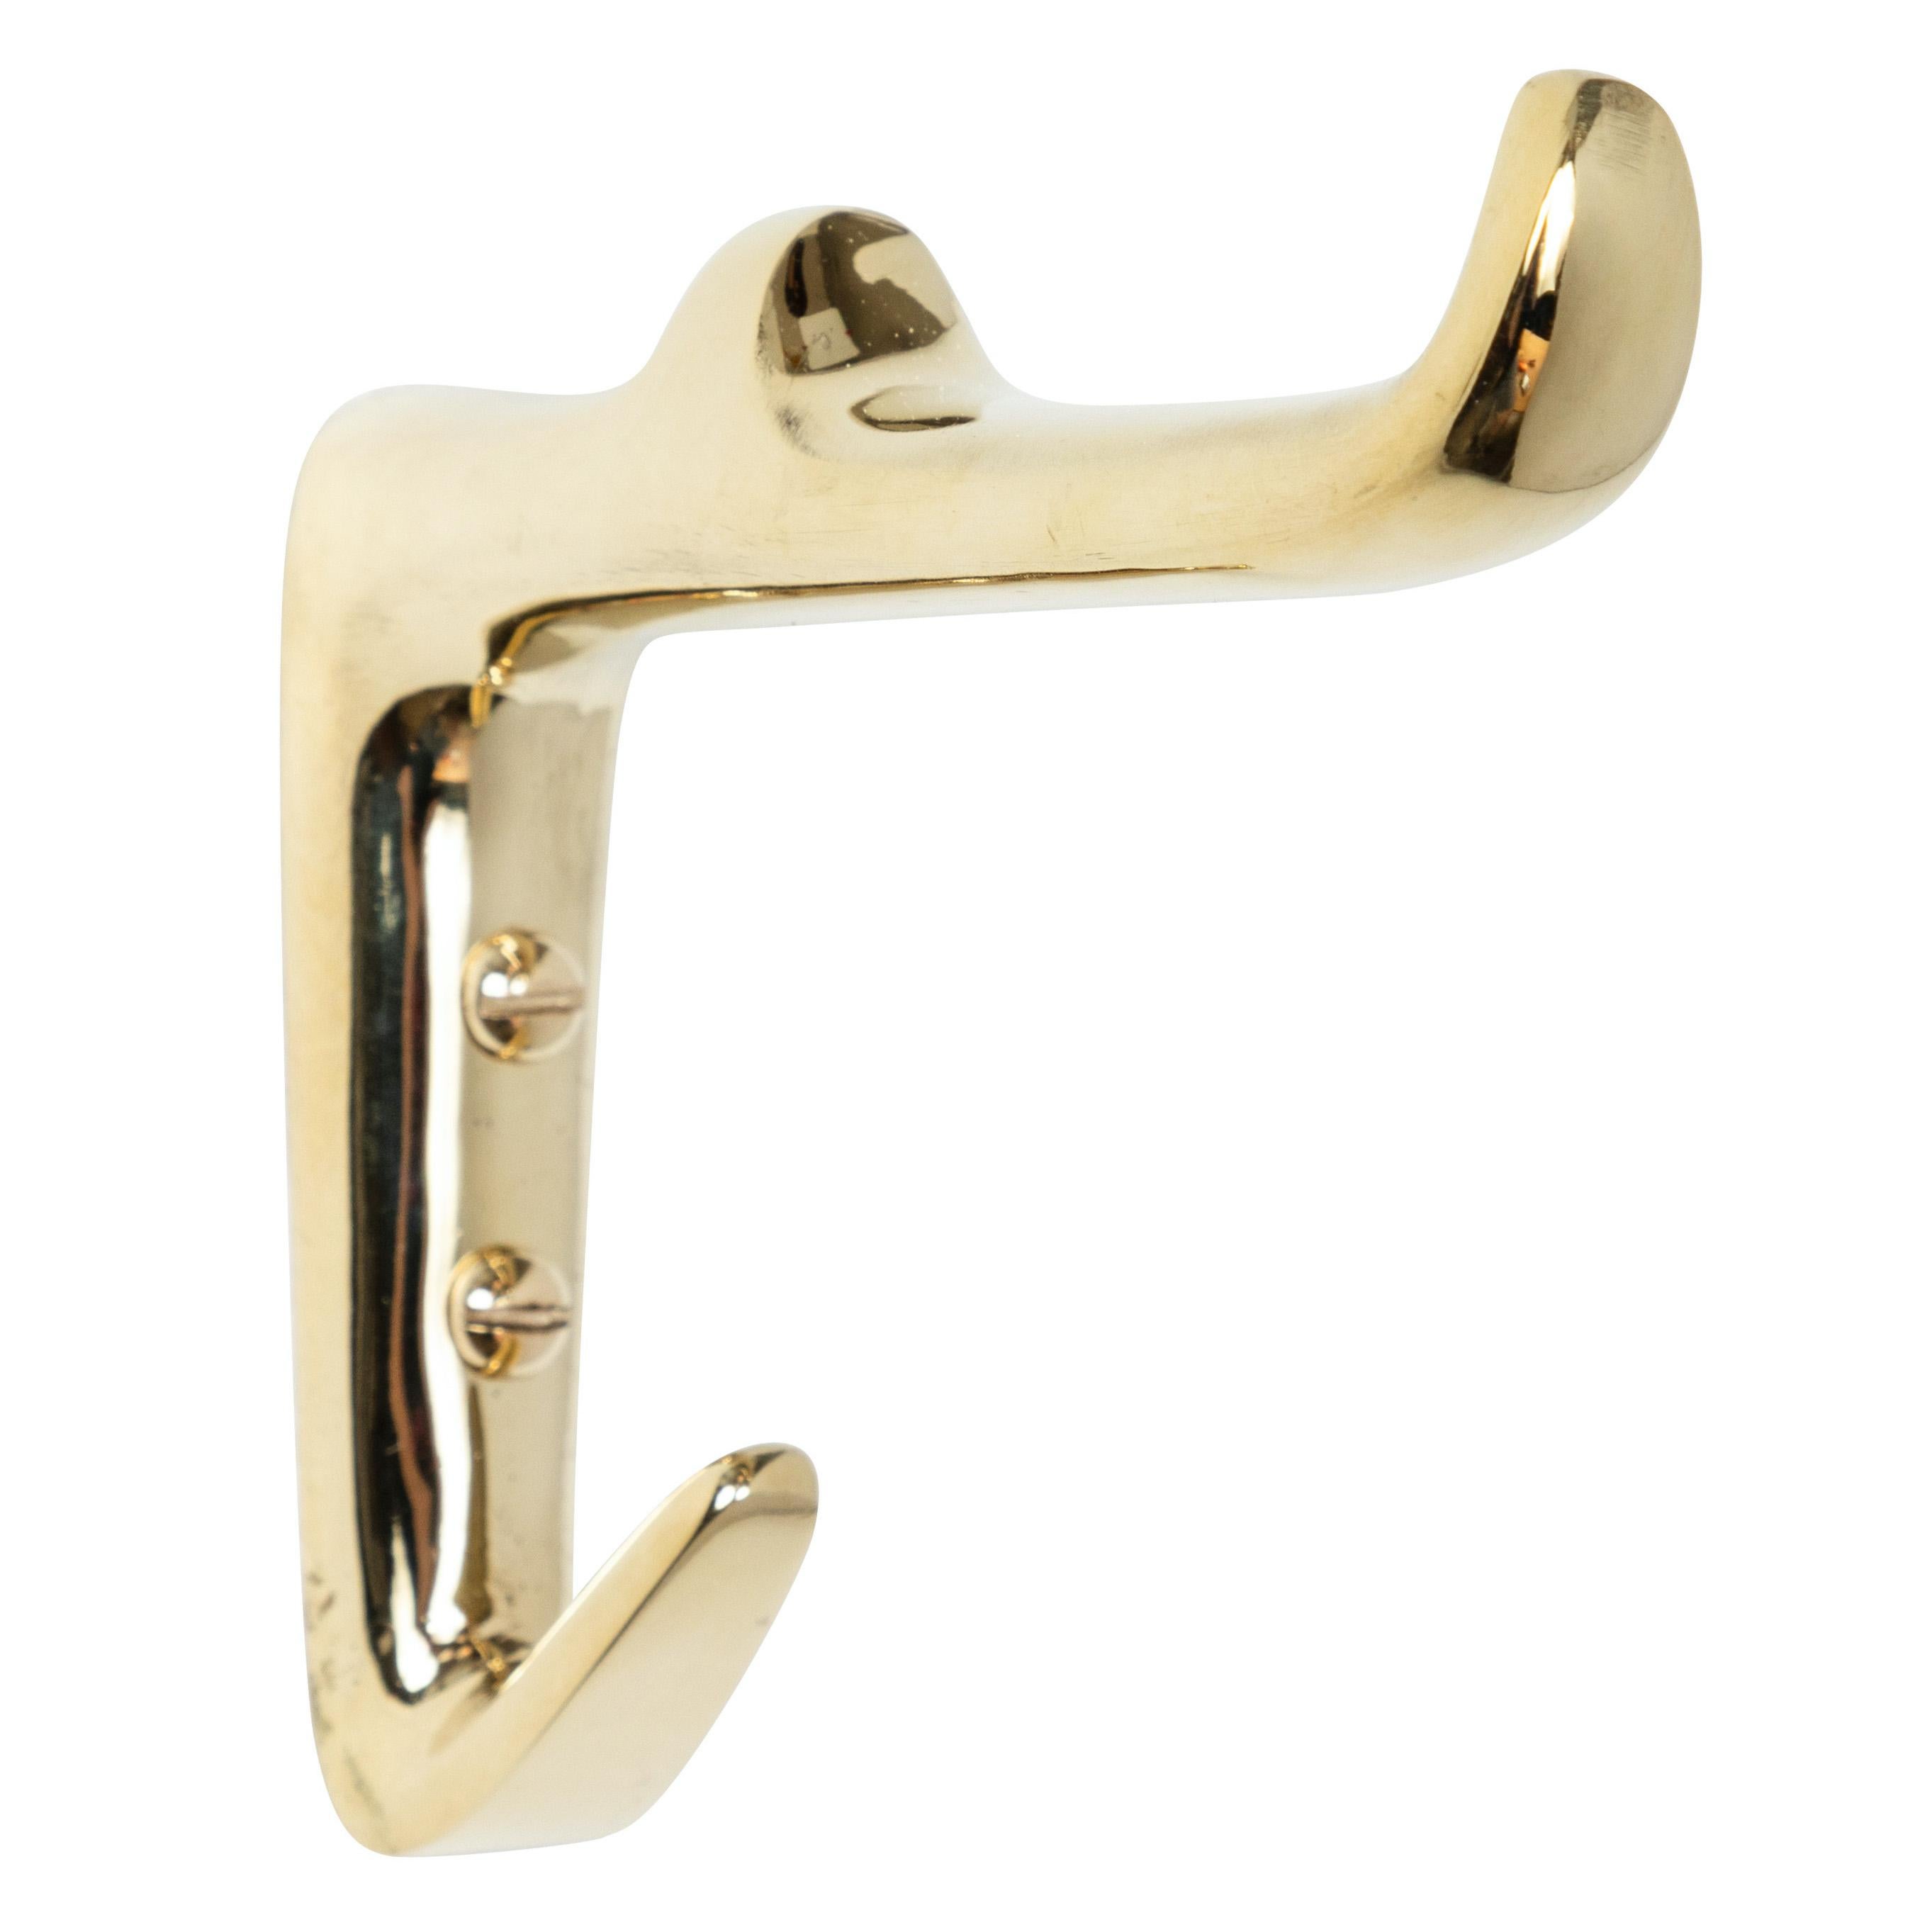 Carl Auböck brass #4956 brass hook. Designed in the 1950s, this versatile and Minimalist Viennese hook is executed in polished brass by Werkstätte Carl Auböck, Austria.

Price is per item. Two in stock ready to ship. Available in unlimited